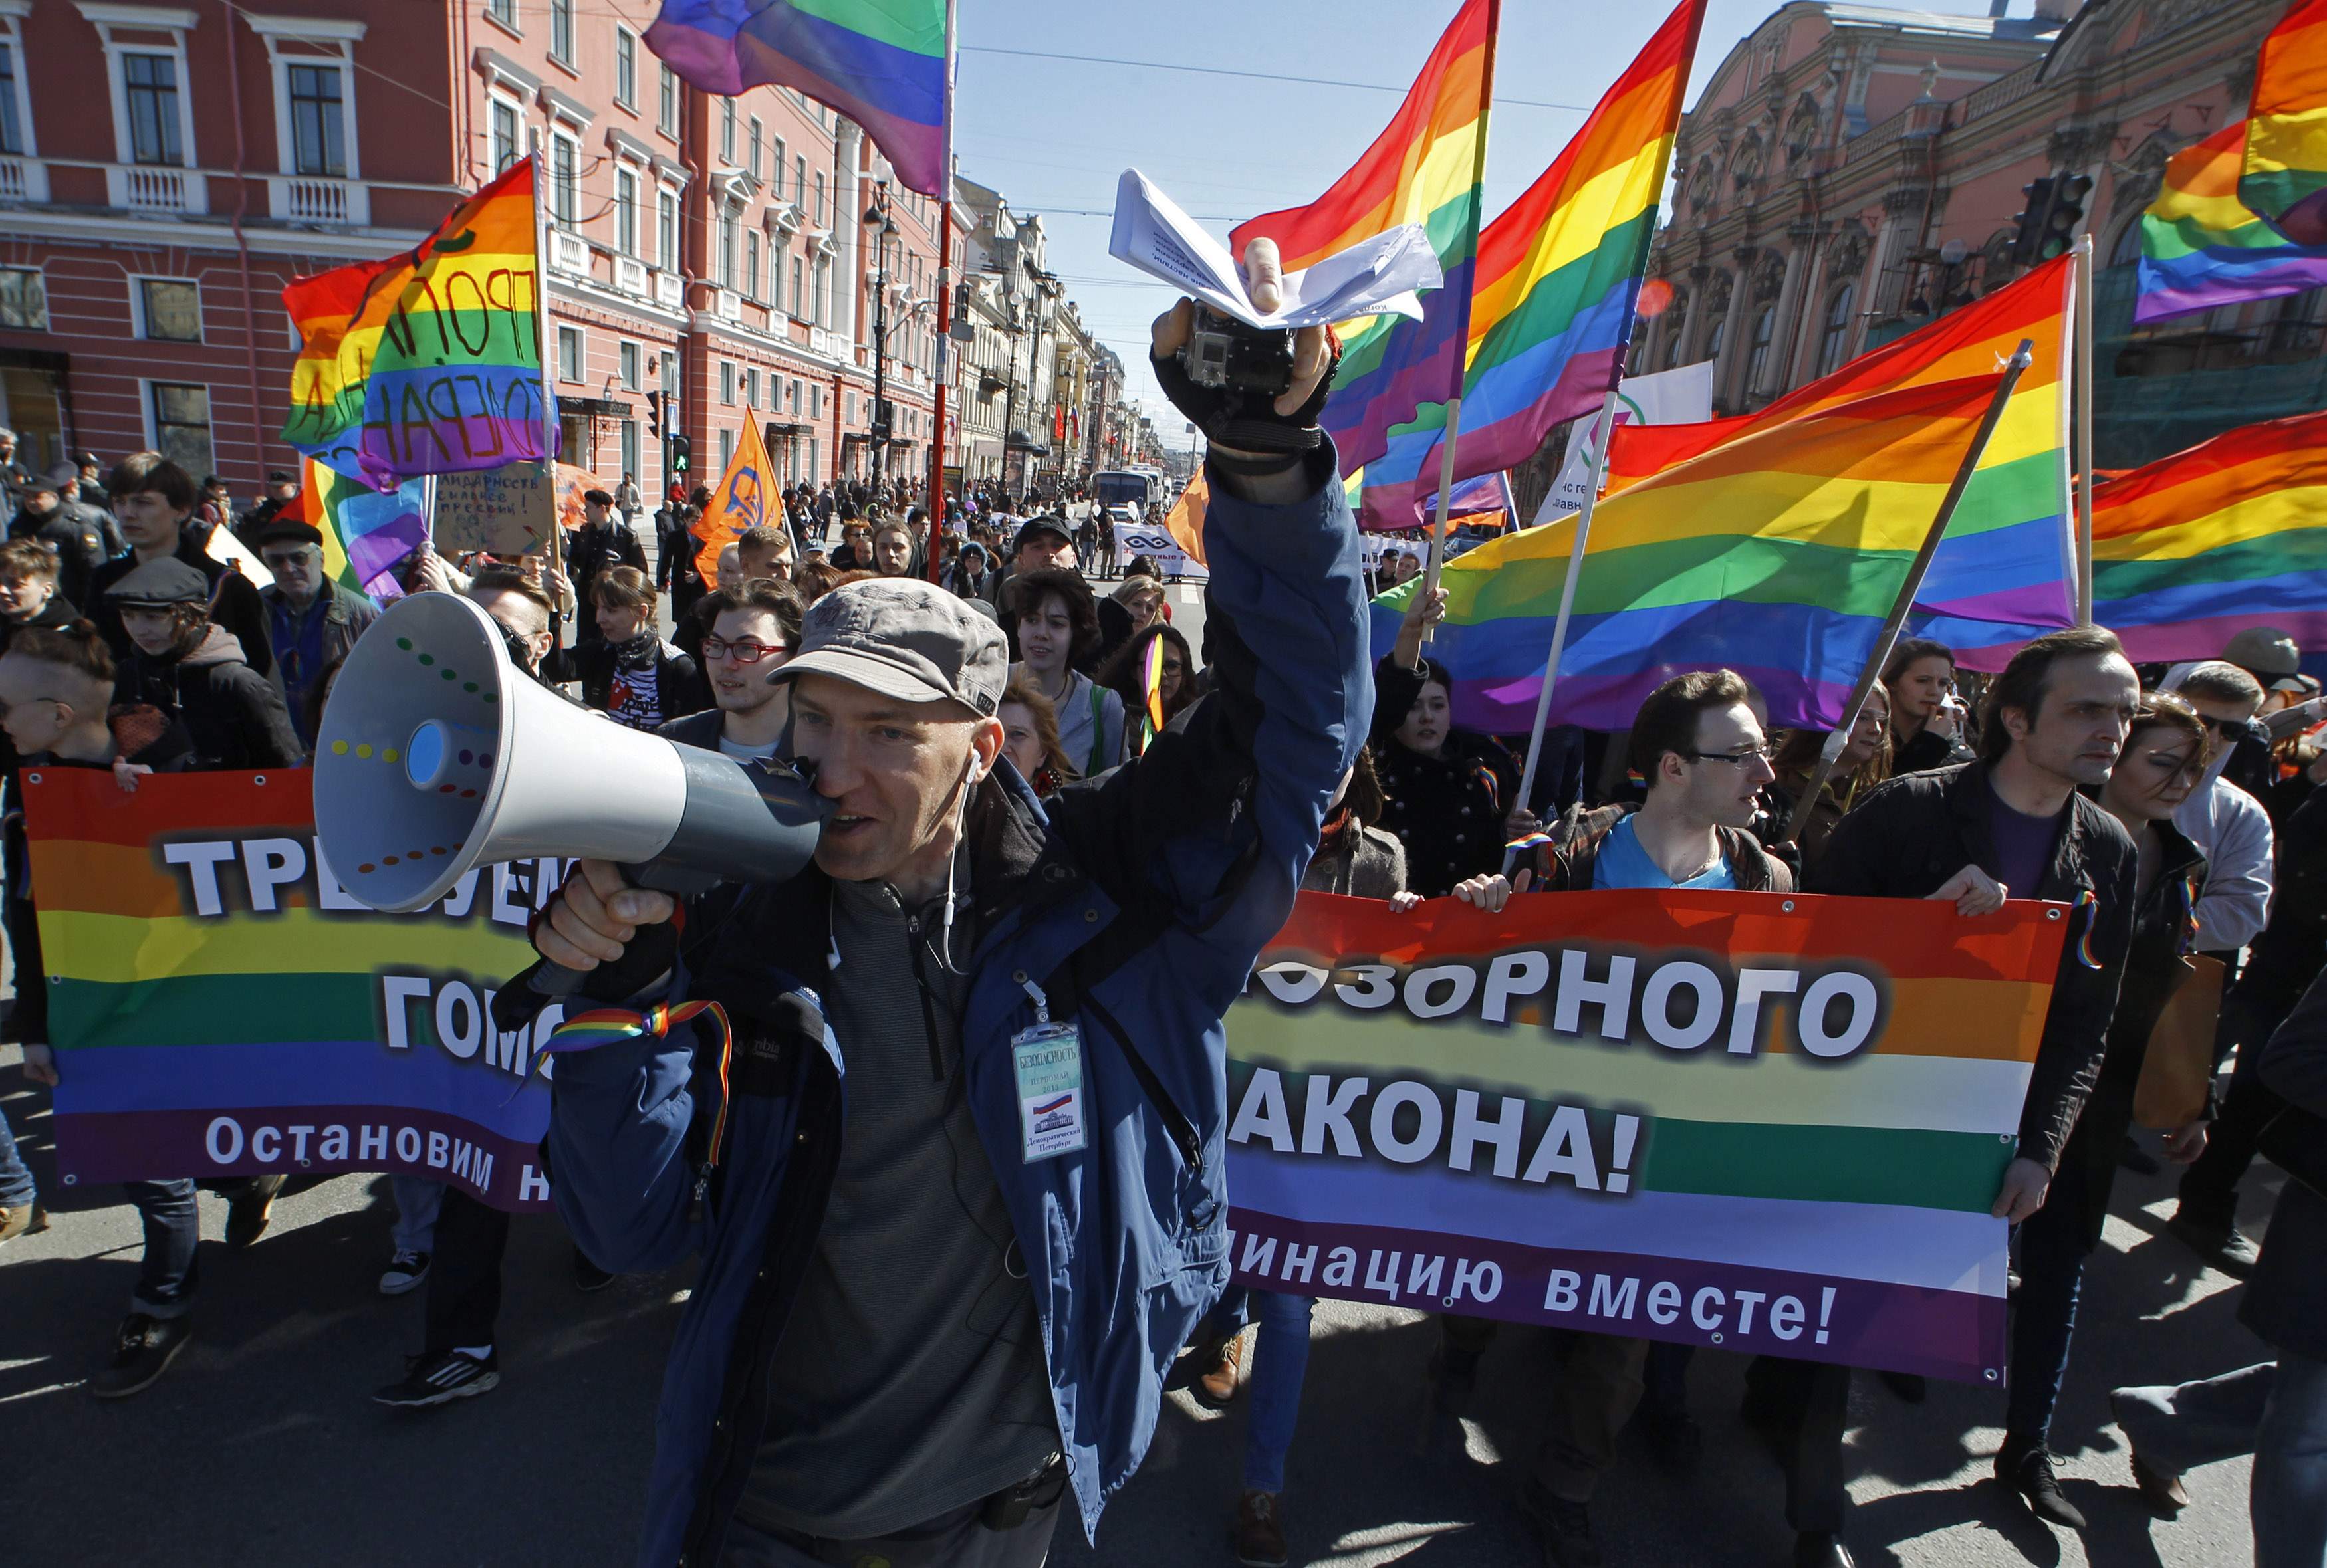 Russian man tortured to death for 'being gay'